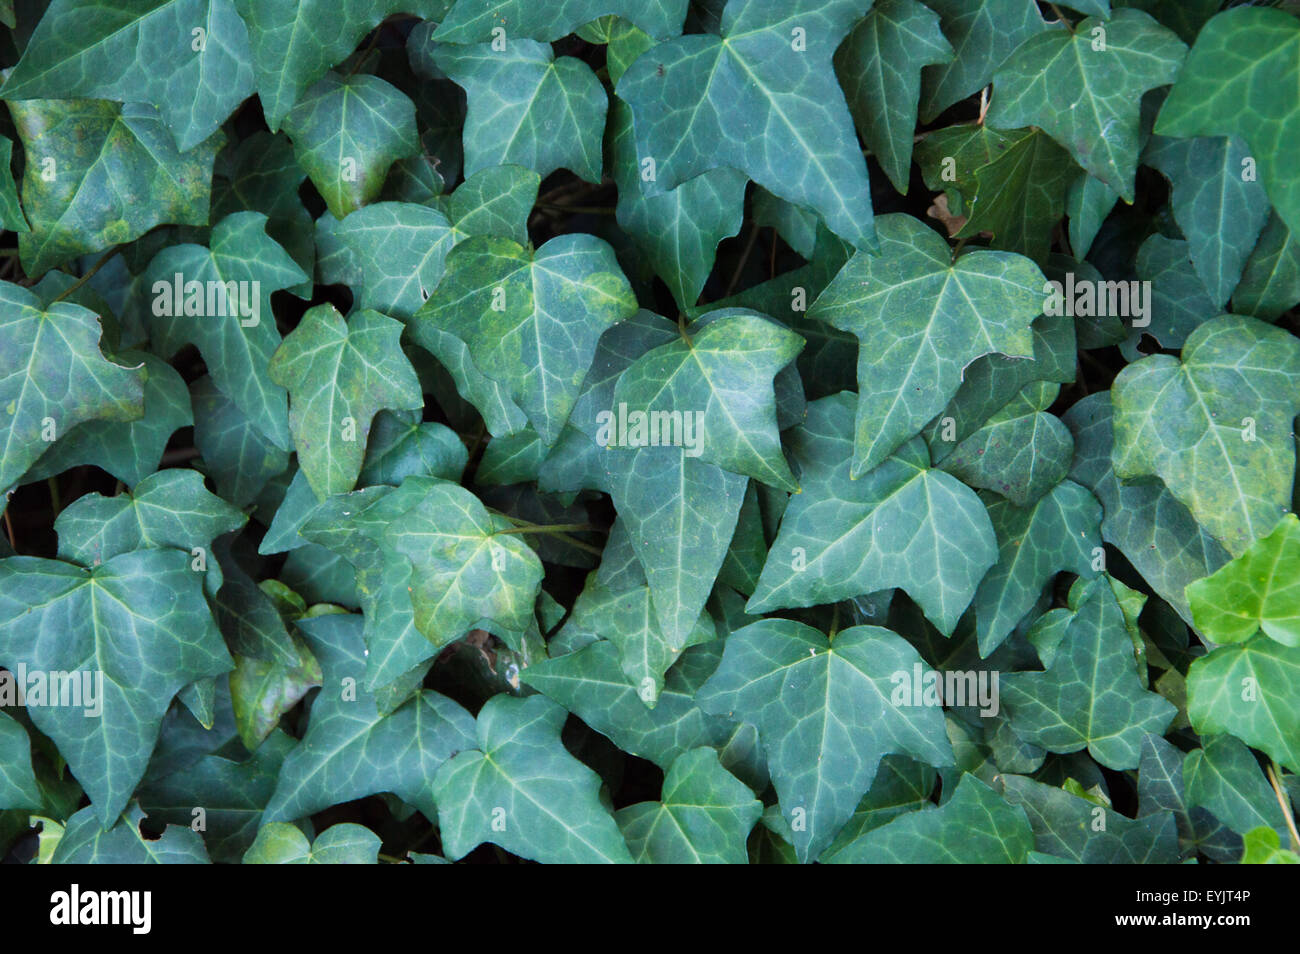 Ivy leaves Stock Photo